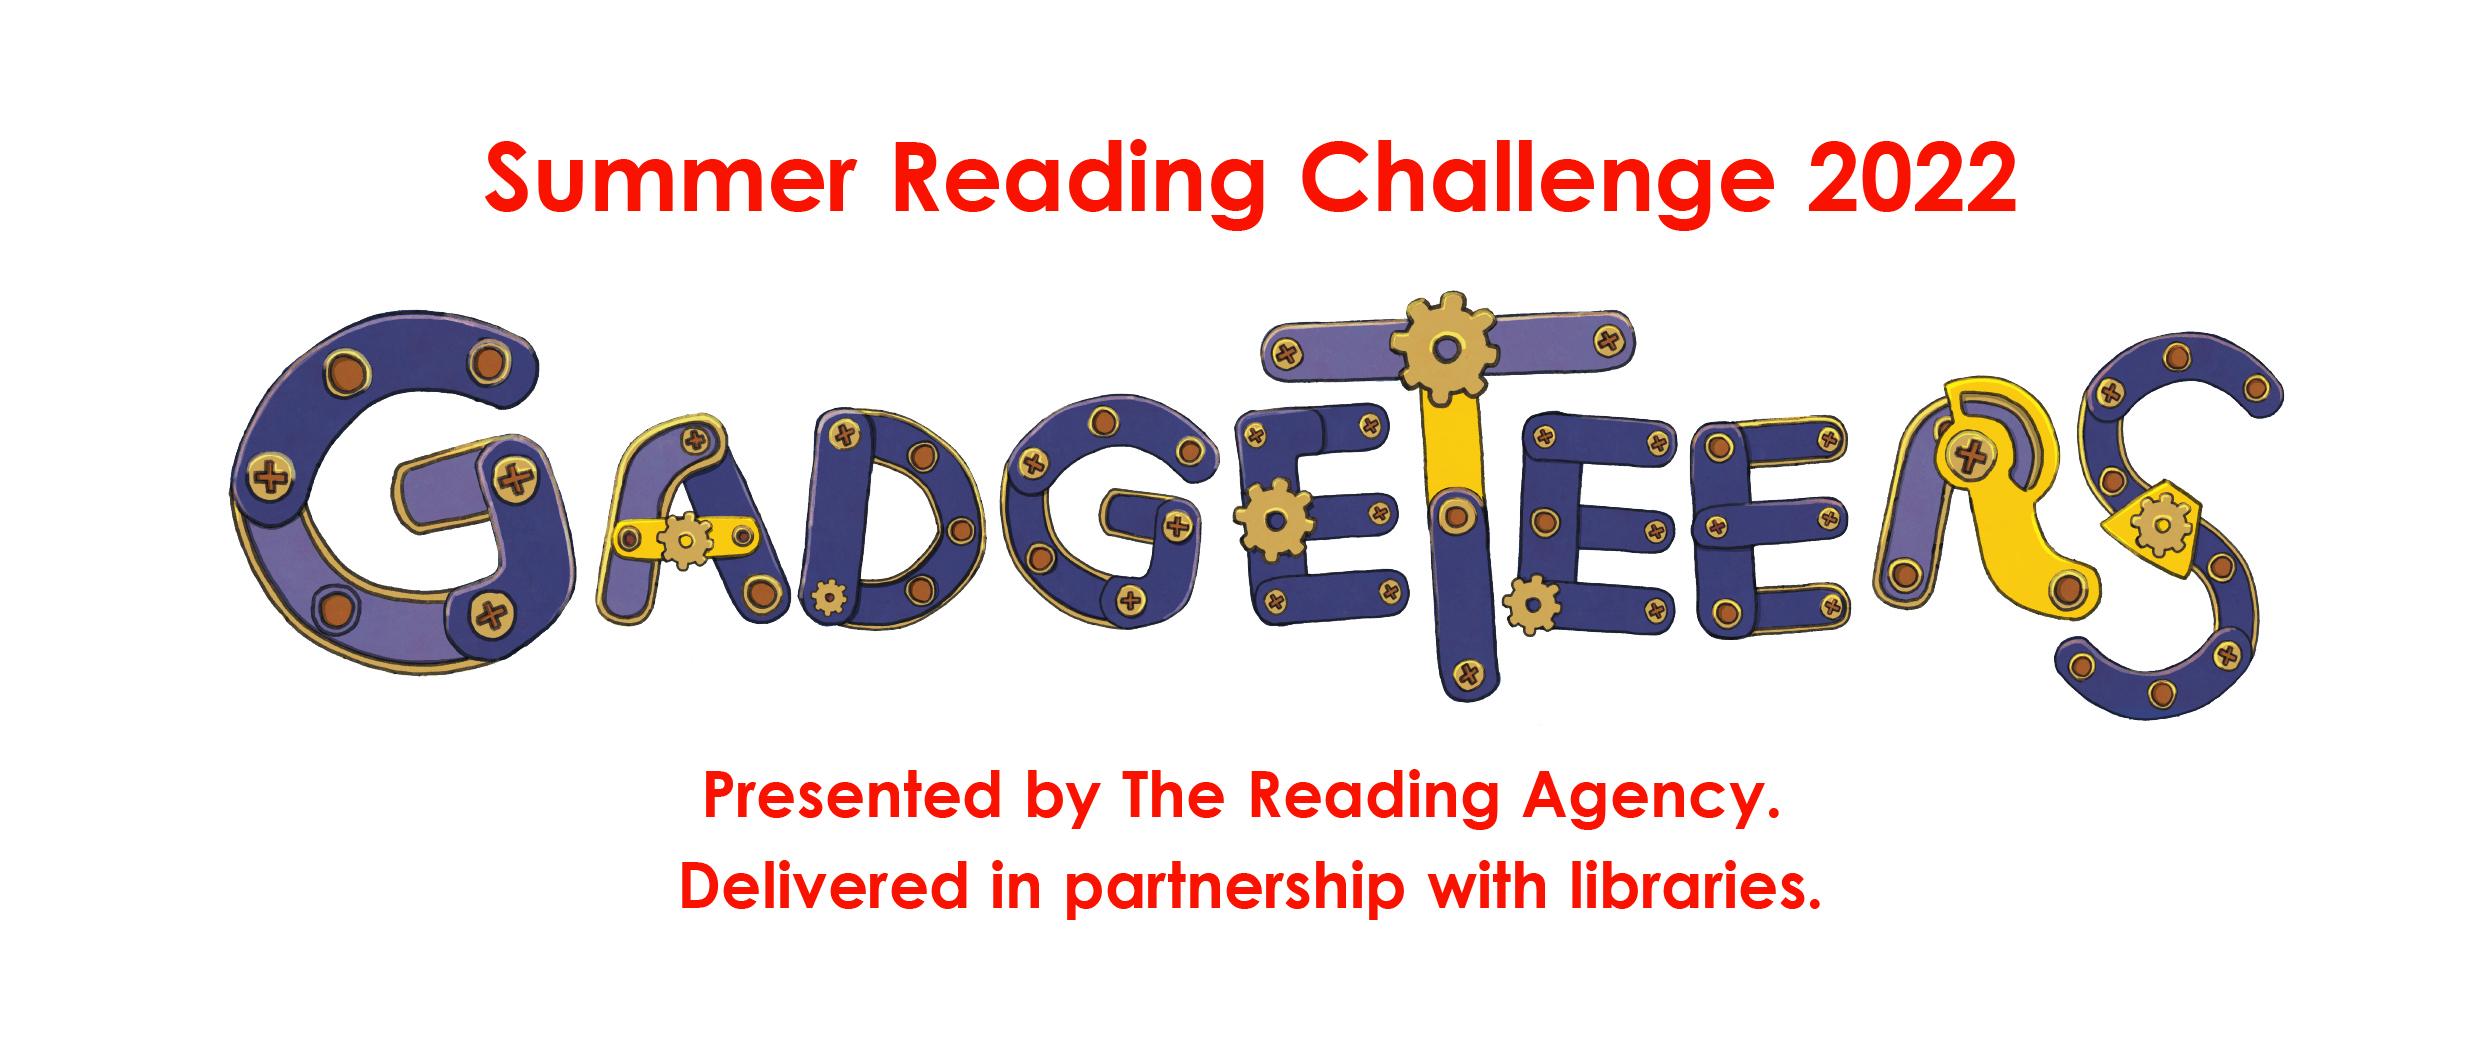 Gadgeteers, presented by The Reading Agency, delivered in partnership with libraries